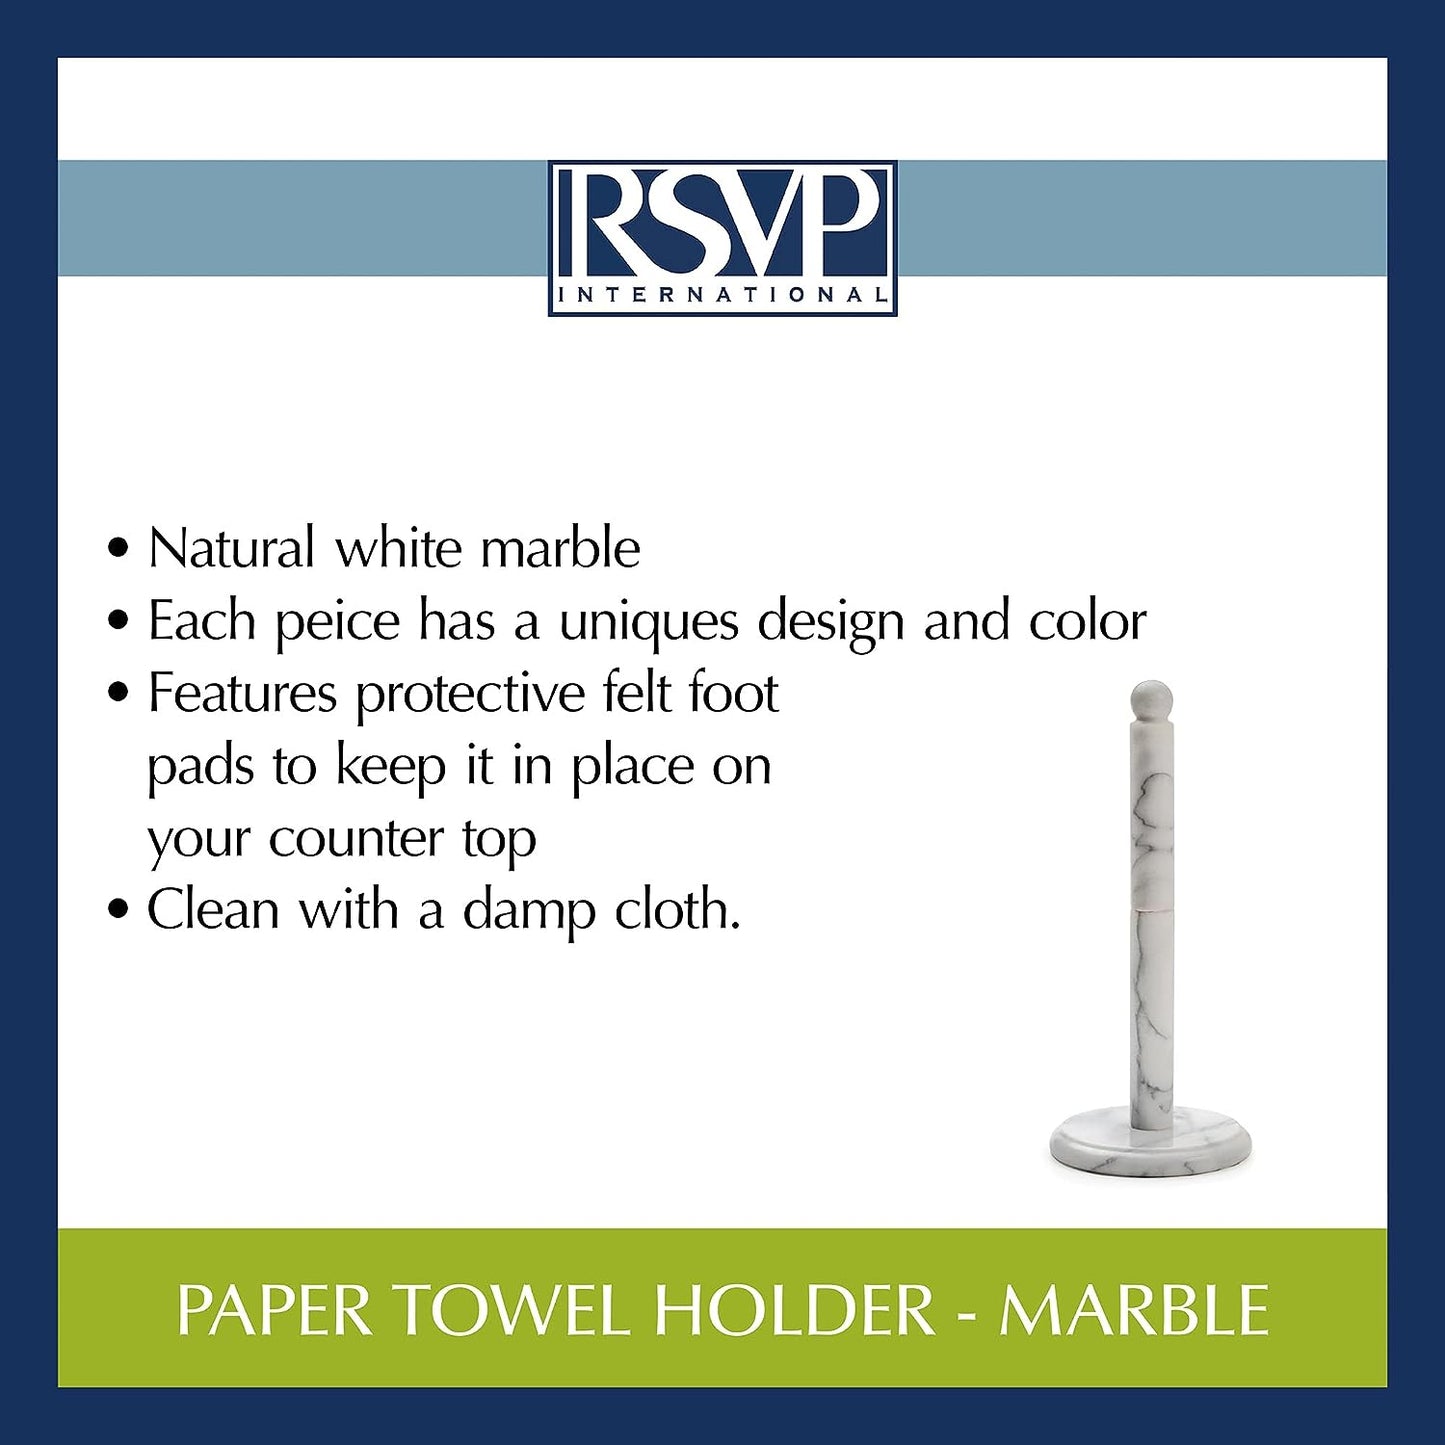 RSVP International Kitchen Collection Marble Paper Towel Holder - Elegant and Practical, 5.13 x 12.75 inches